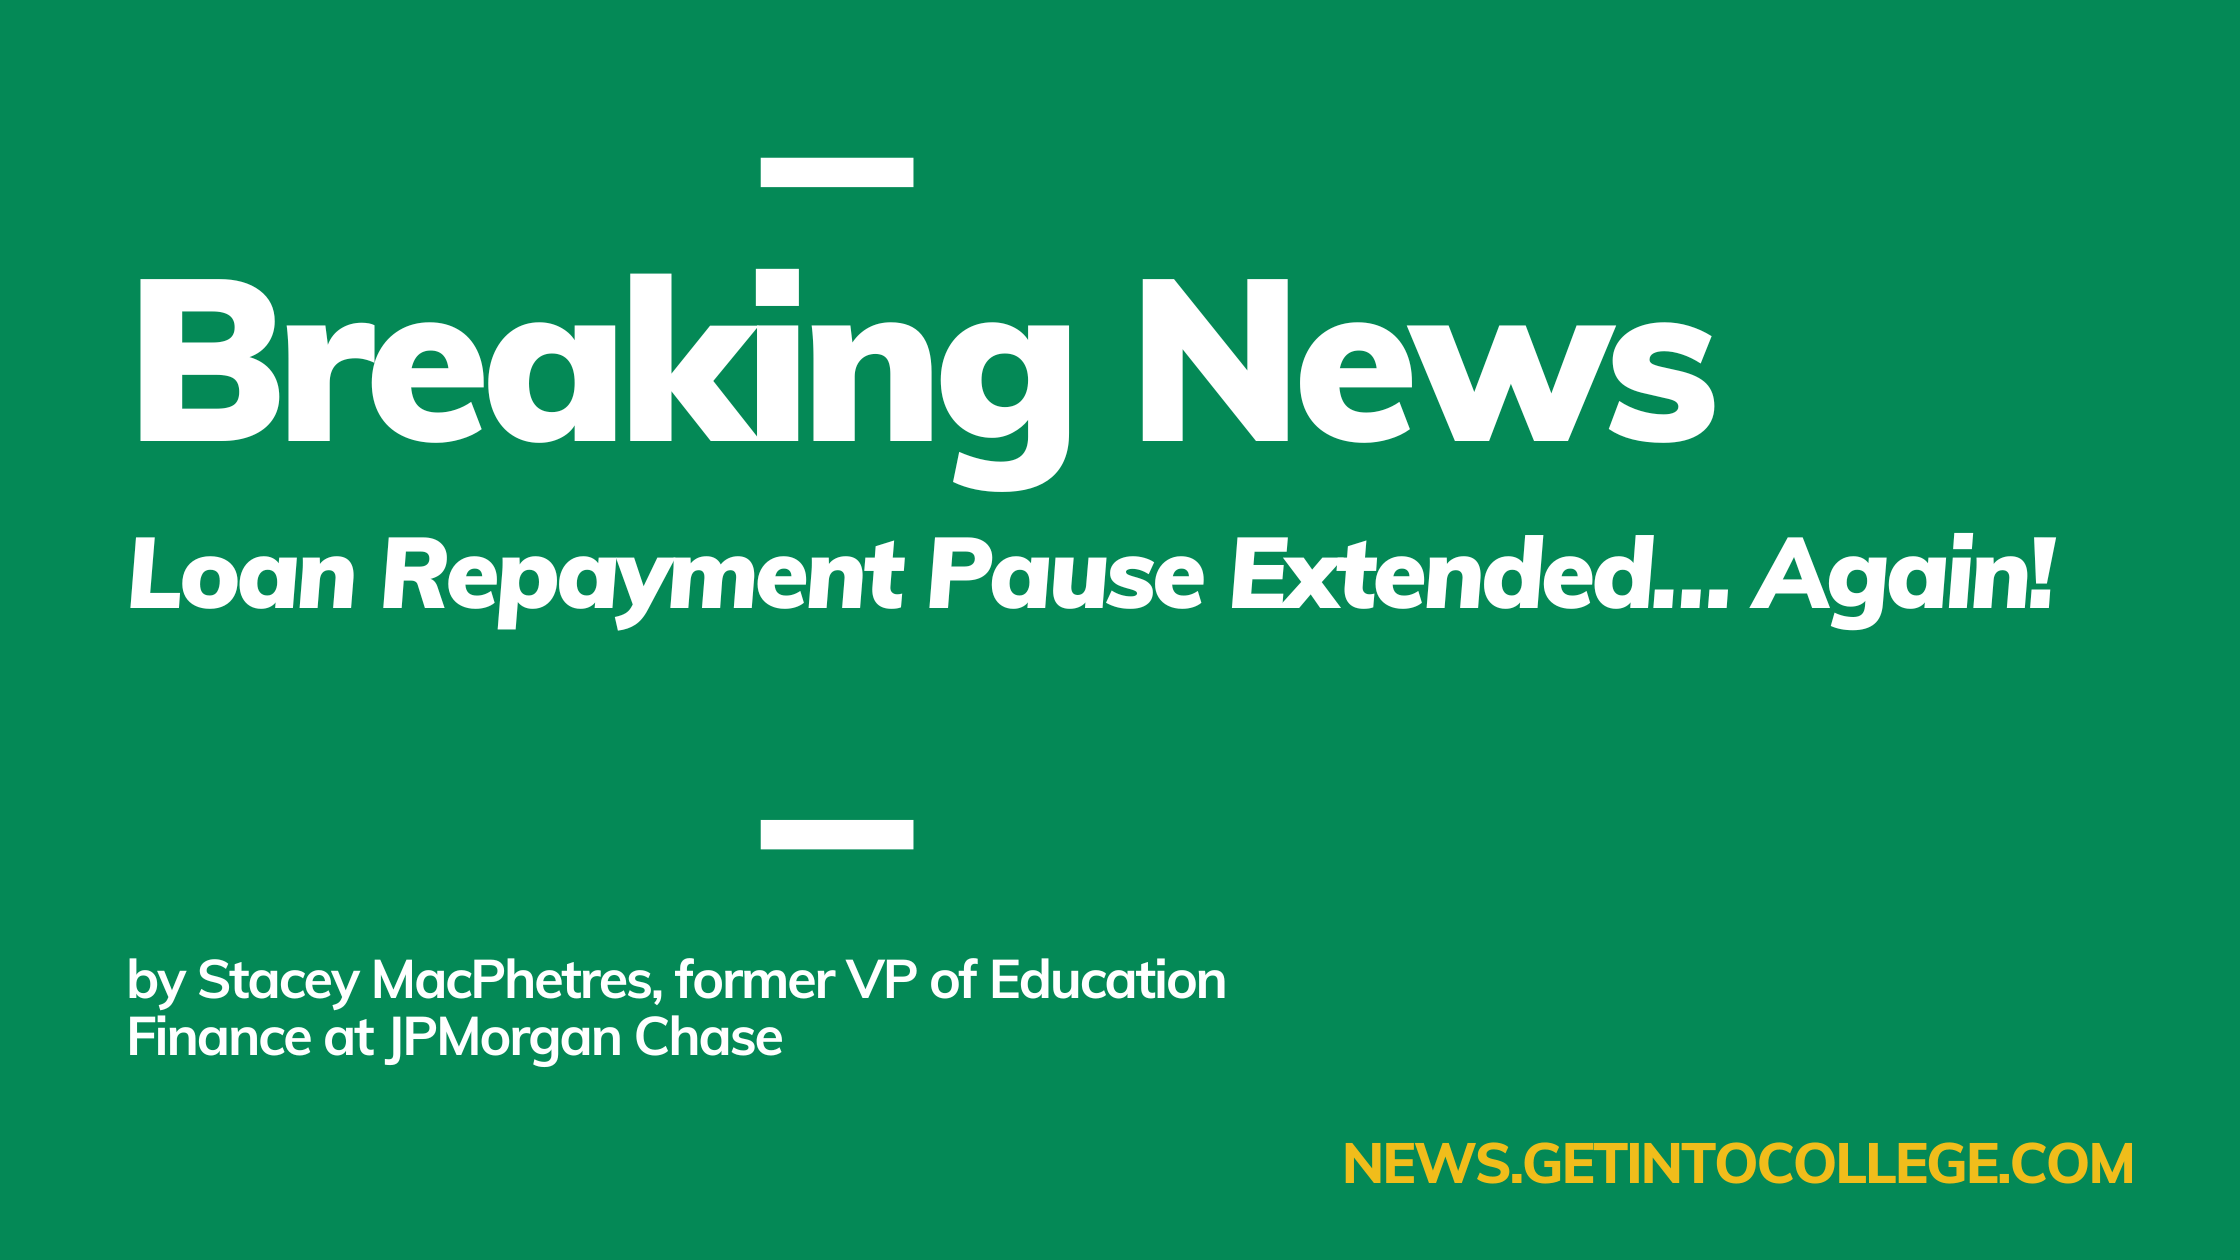 loan repayment pause extended again